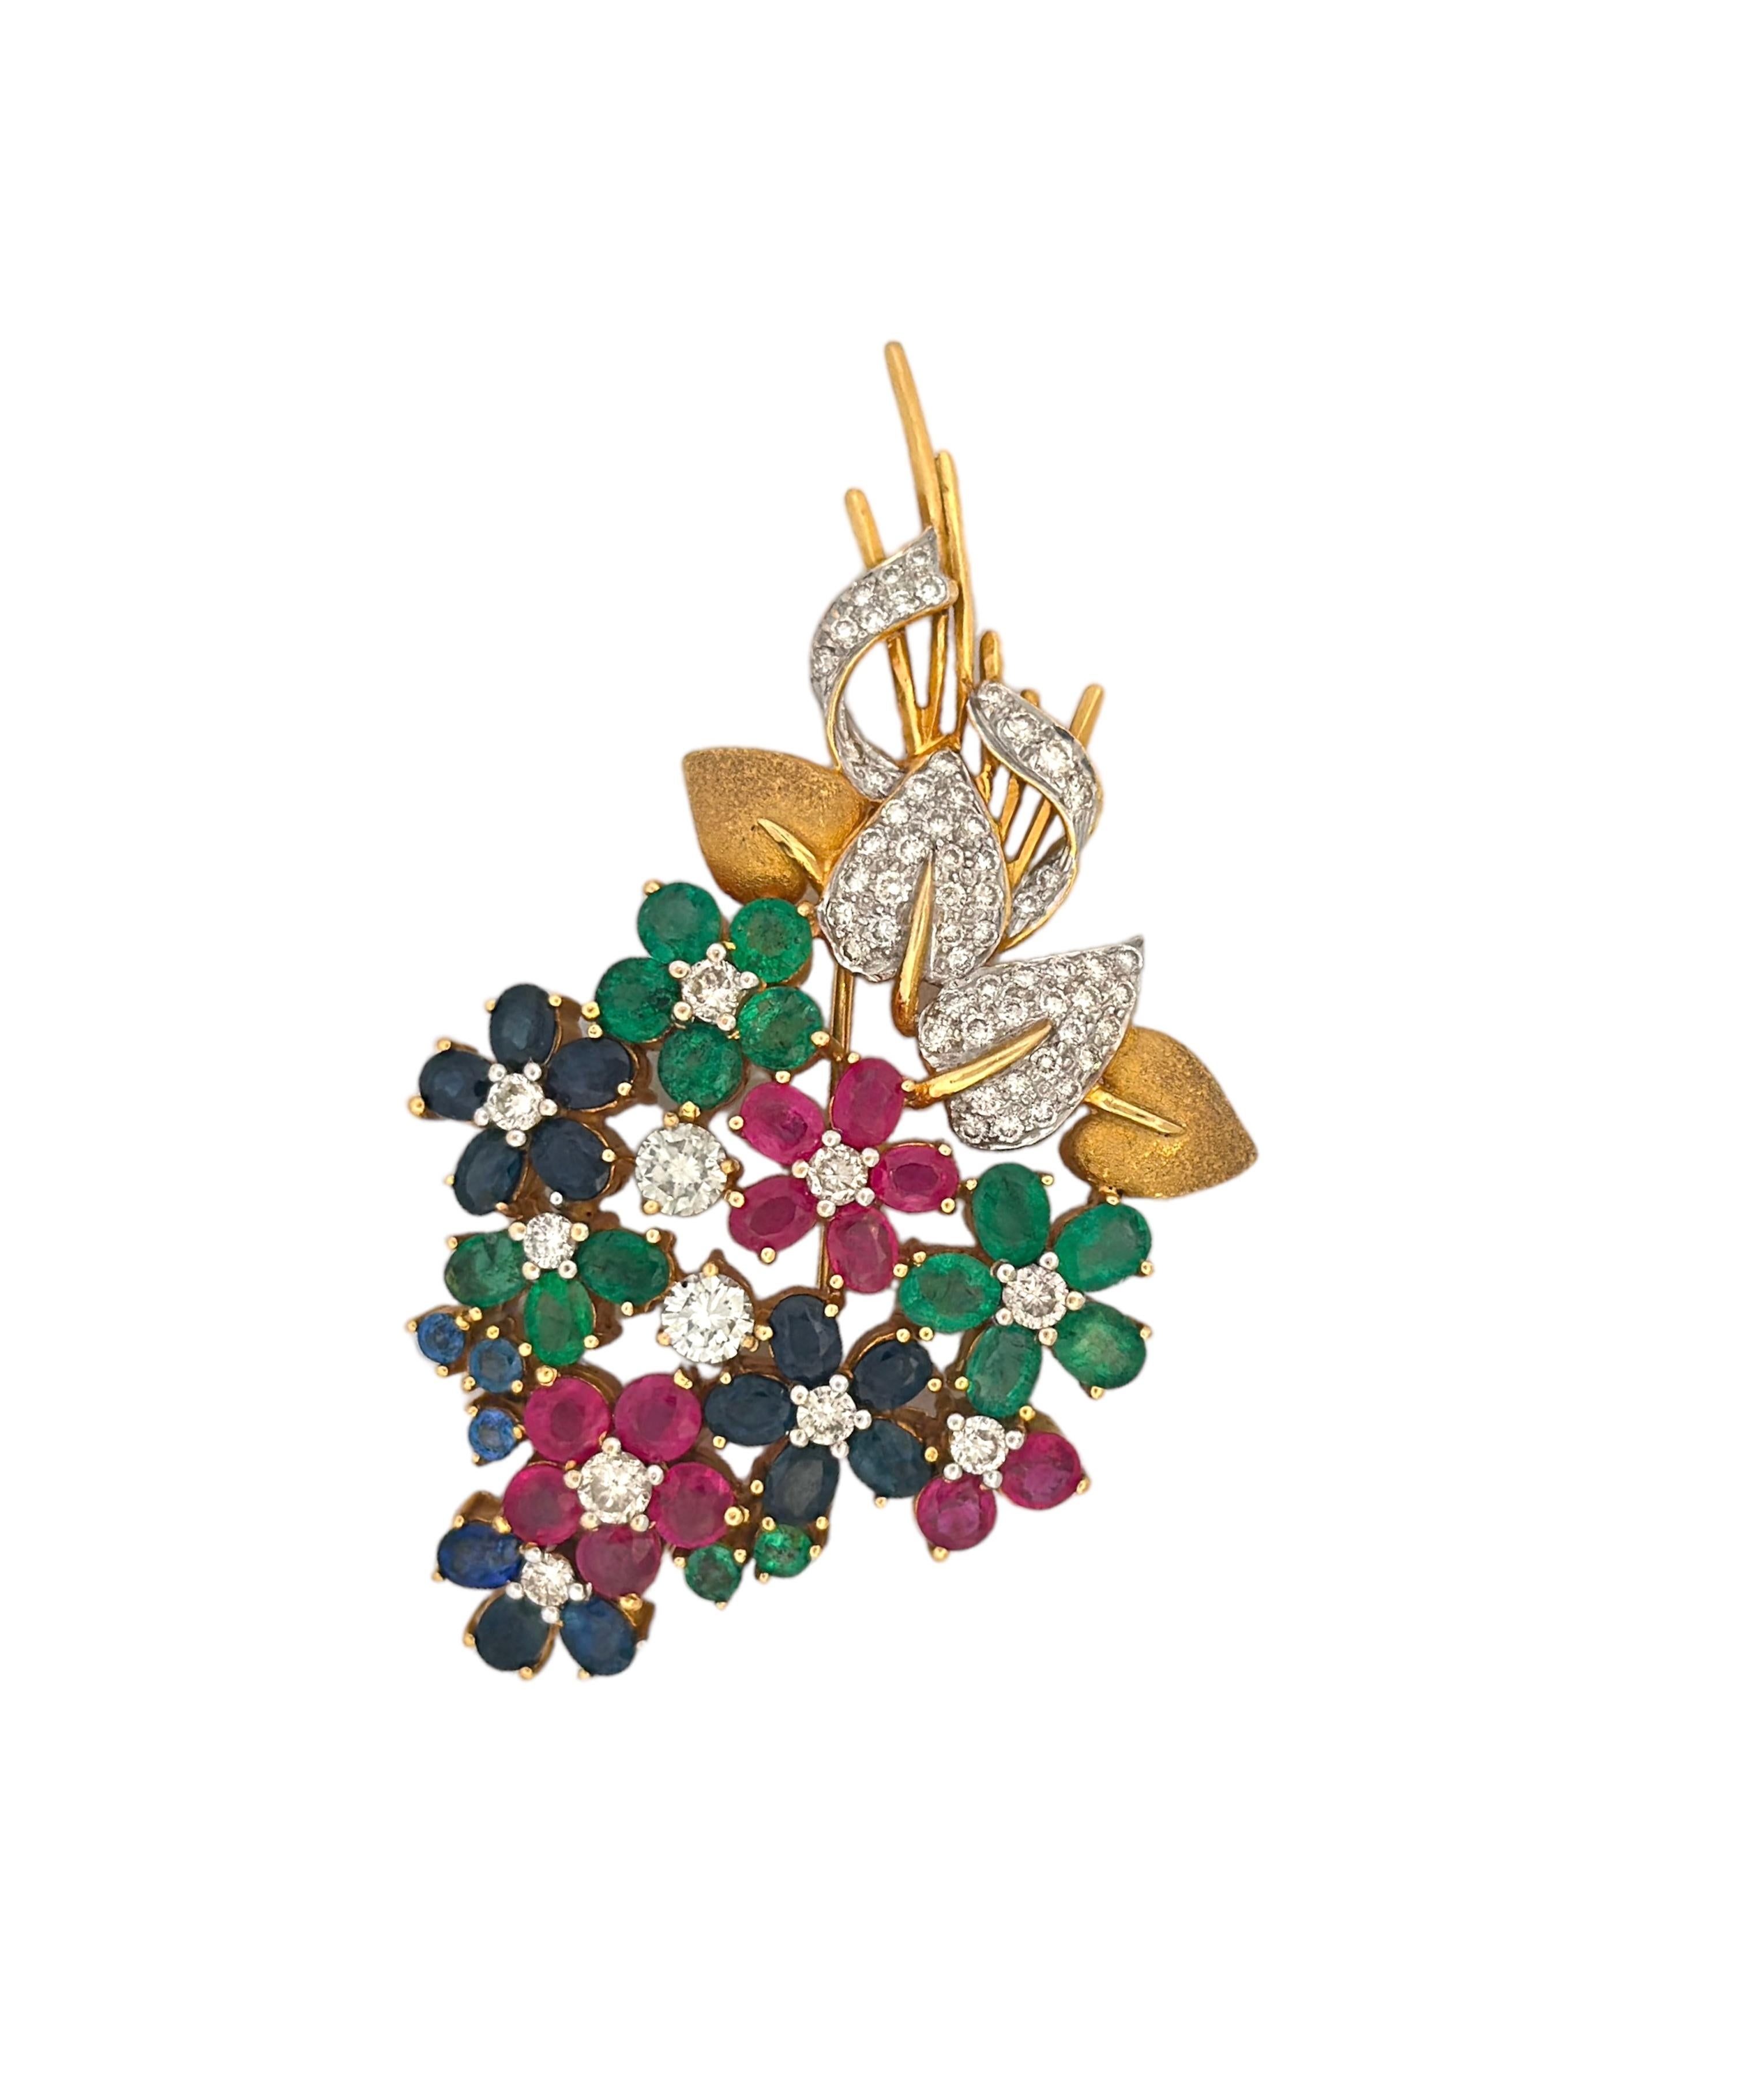 Journey back in time to the opulent 20th century with this exquisite Emerald, Ruby, Sapphire, and White Diamond Bouquet Brooch. A harmonious medley of gemstones adorns this vintage masterpiece, with vibrant emeralds, deep rubies, brilliant